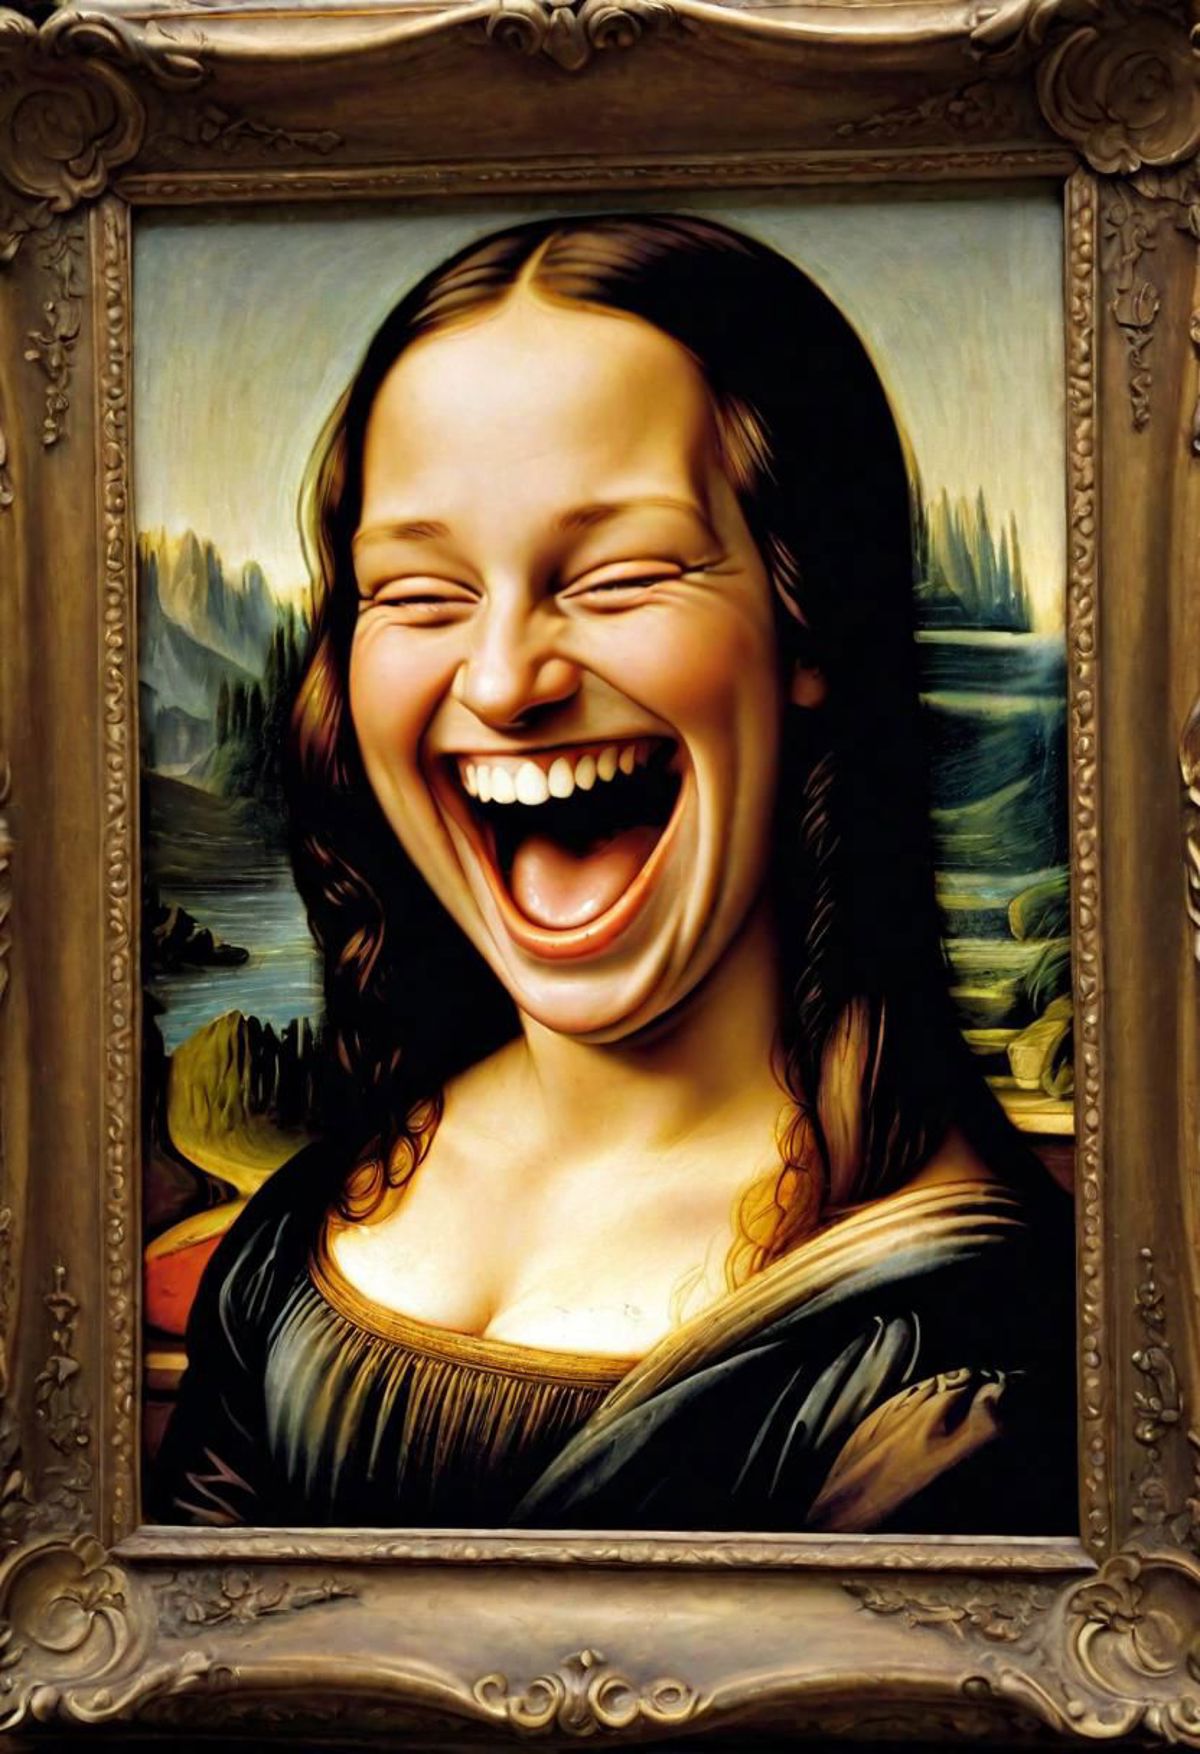 A painting of a woman with a big smile.